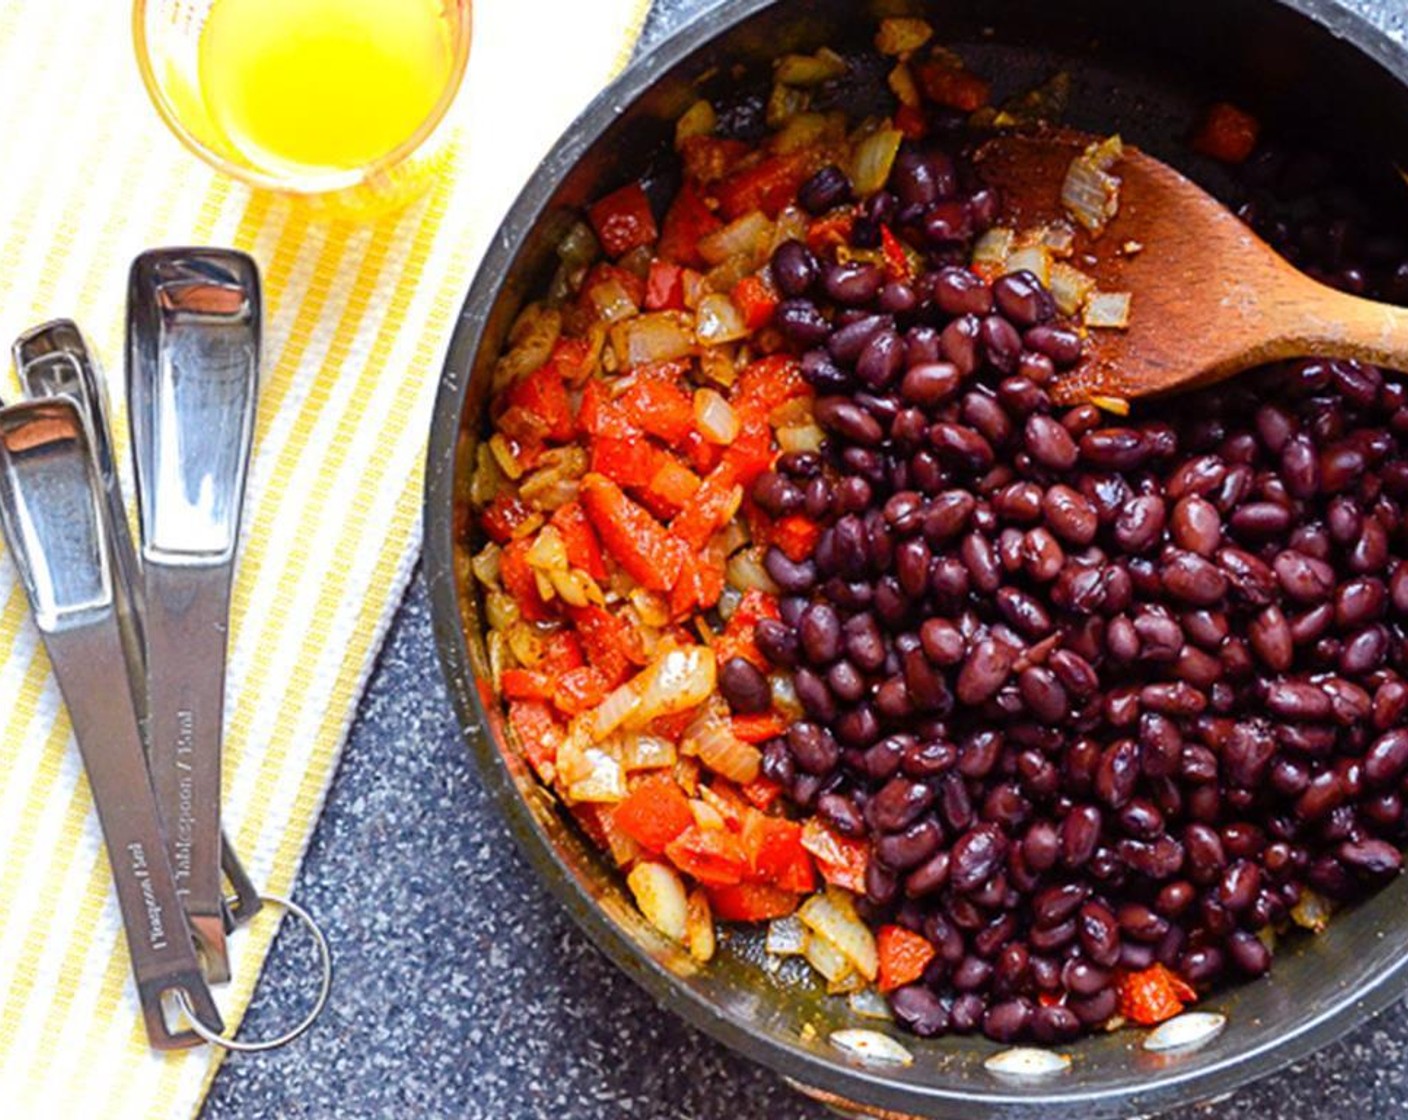 step 3 Add Canned Black Beans (1 can), Ground Cumin (1 tsp), Chipotle Chili Powder (1/2 tsp), Kosher Salt (1/4 tsp) and Ground Black Pepper (1/4 tsp). Stir to combine. Add the Chicken Broth (1/4 cup). Cook over medium heat for 3 to 4 minutes until most of the liquid is evaporated.